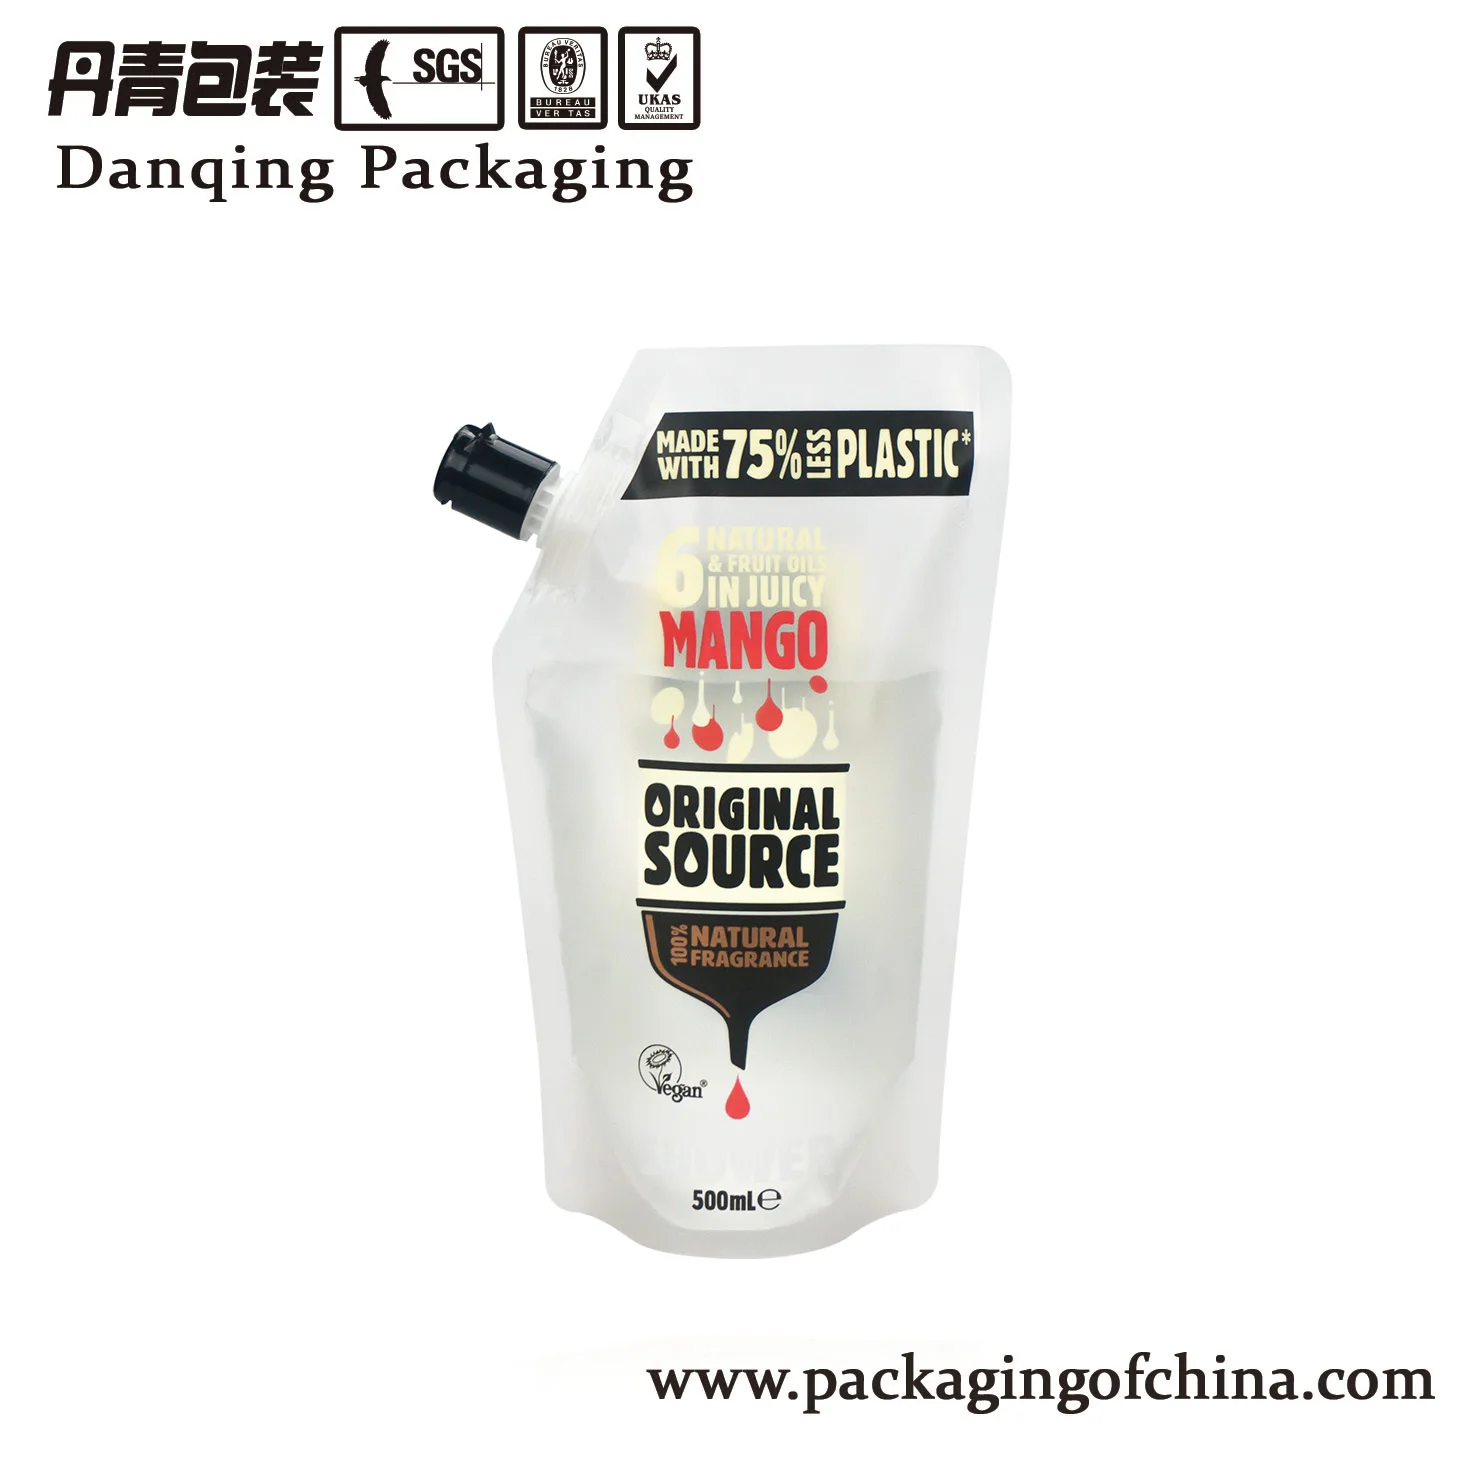 China suppliers DQ PACK New products stand up doypack for food packaging liquid pouch